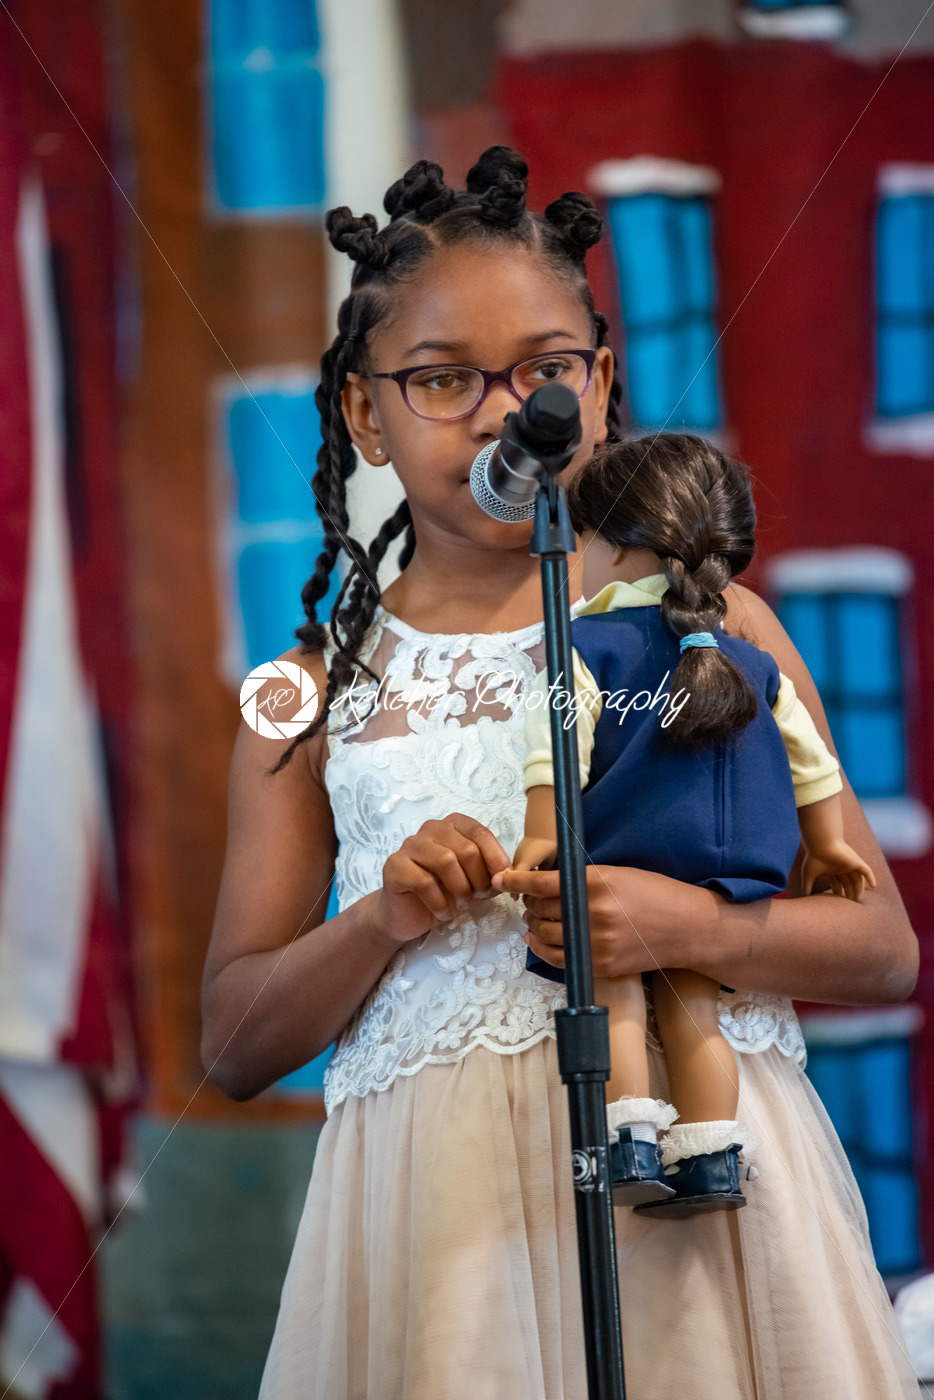 ROSEMONT, PA – MAY 31, 2019: Lower school moving up day graduation for fourth grade at The Agnes Irwin School - Kelleher Photography Store